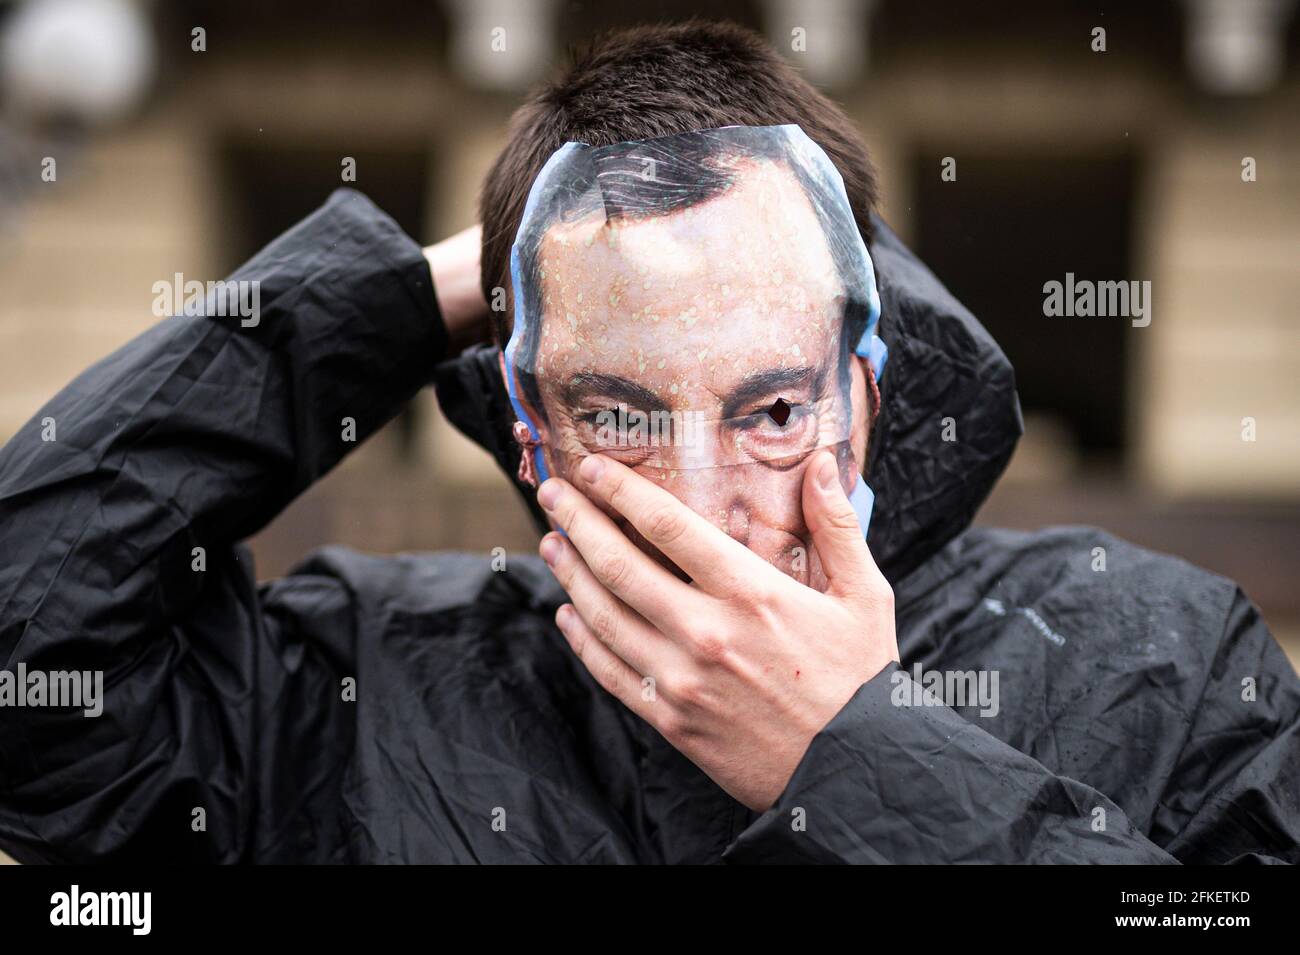 Turin, Italy. 01 May 2021. A demonstrator wears a mask depicting Italian Prime Minister Mario Draghi during a May Day rally (also known as International Workers' Day or Labour Day). May Day occurs every year on 1 May and it is used to mark the fight for workers' rights across the world . Credit: Nicolò Campo/Alamy Live News Stock Photo